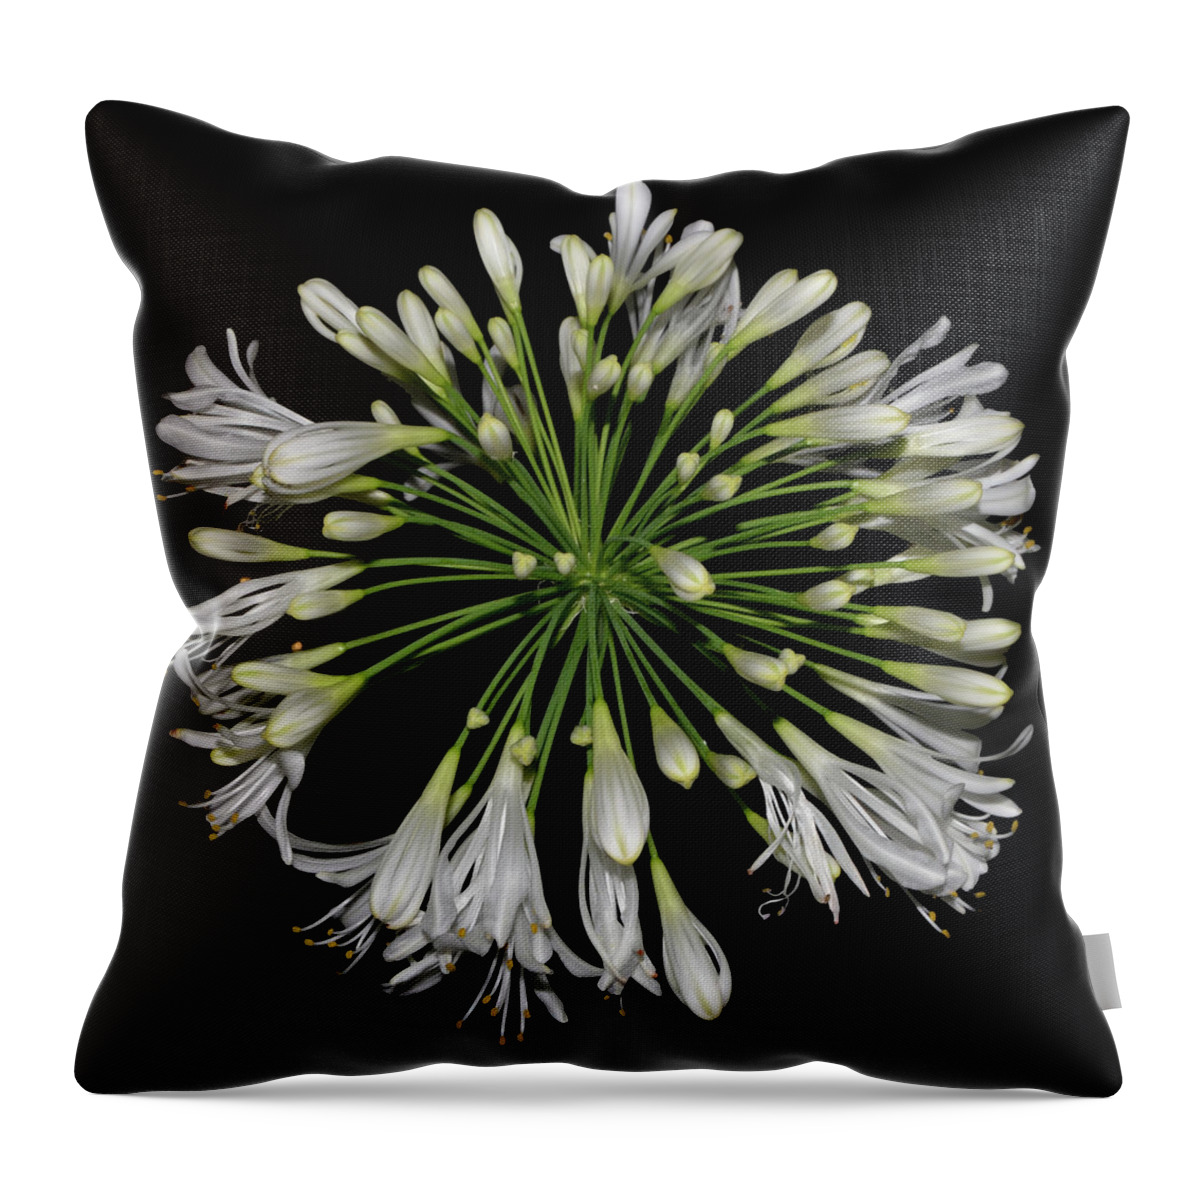 Nature Throw Pillow featuring the photograph Natures Fireworks - Lily Of The Nile 005 by George Bostian